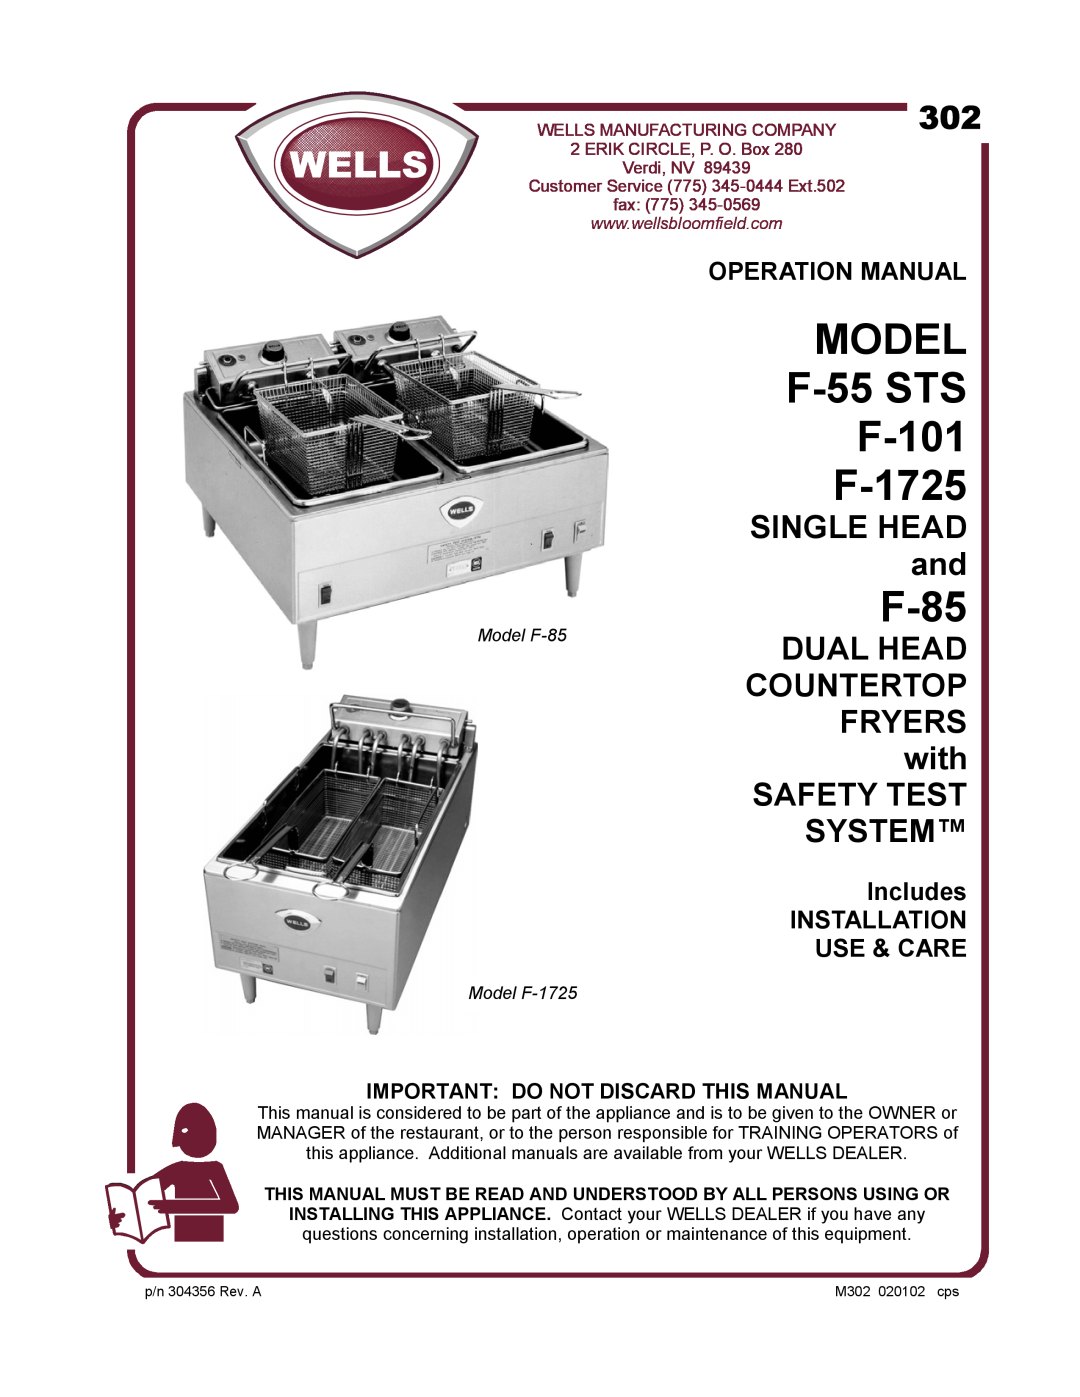 Wells operation manual Includes, Important Do Not Discard This Manual, MODEL F-55STS F-101 F-1725, F-85, Verdi, NV, fax 